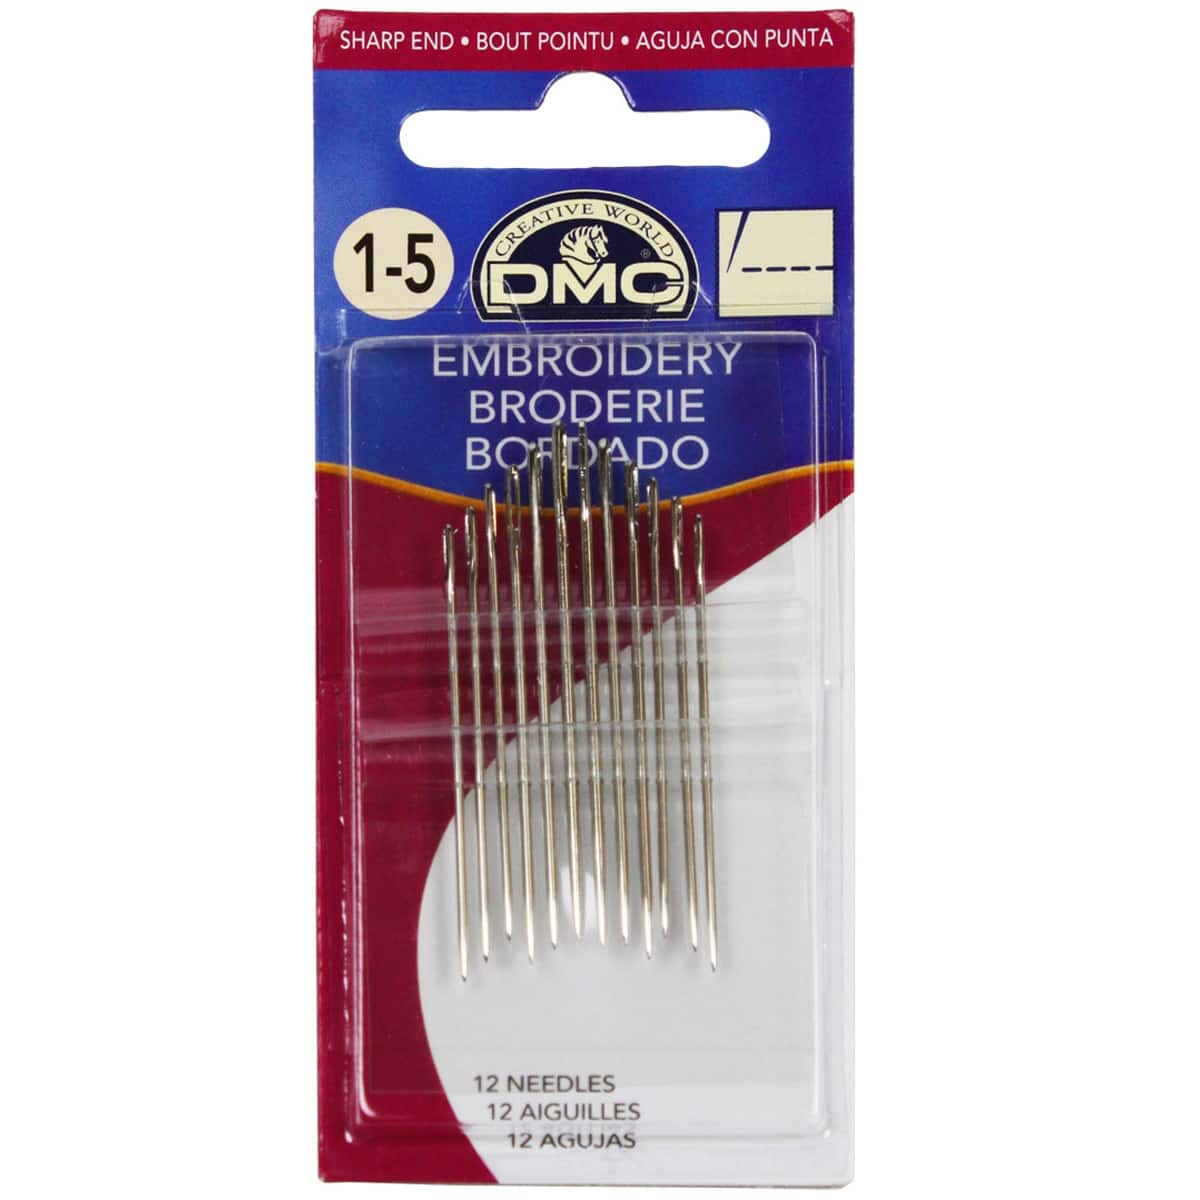 24 Packs: 12 ct. (288 total) DMC&#xAE; Embroidery Needles, Size 1-5